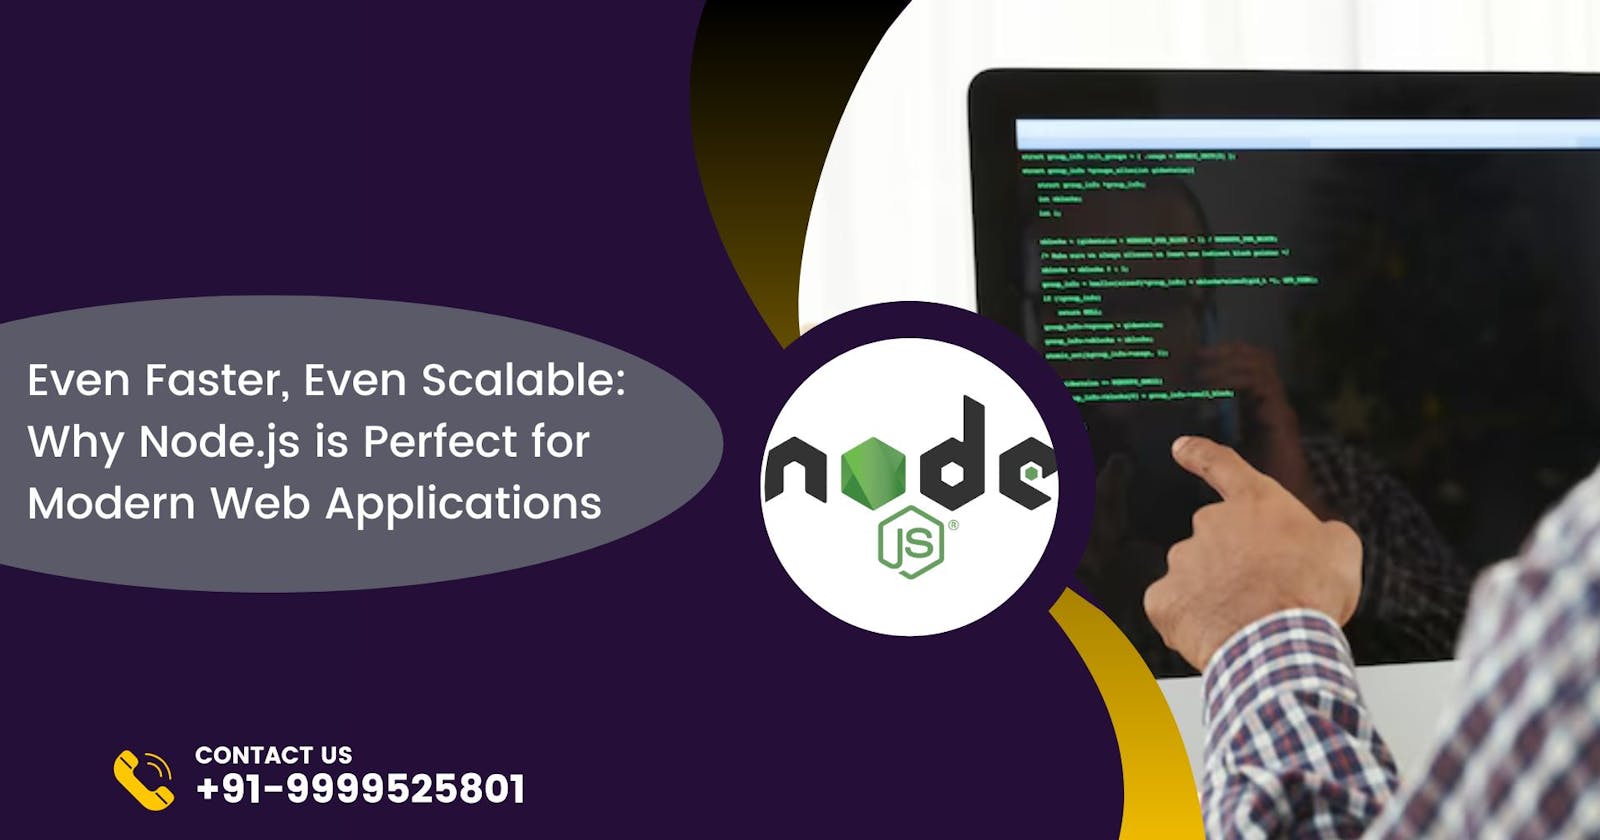 Even Faster, Even Scalable: Why Node.js is Perfect for Modern Web Applications